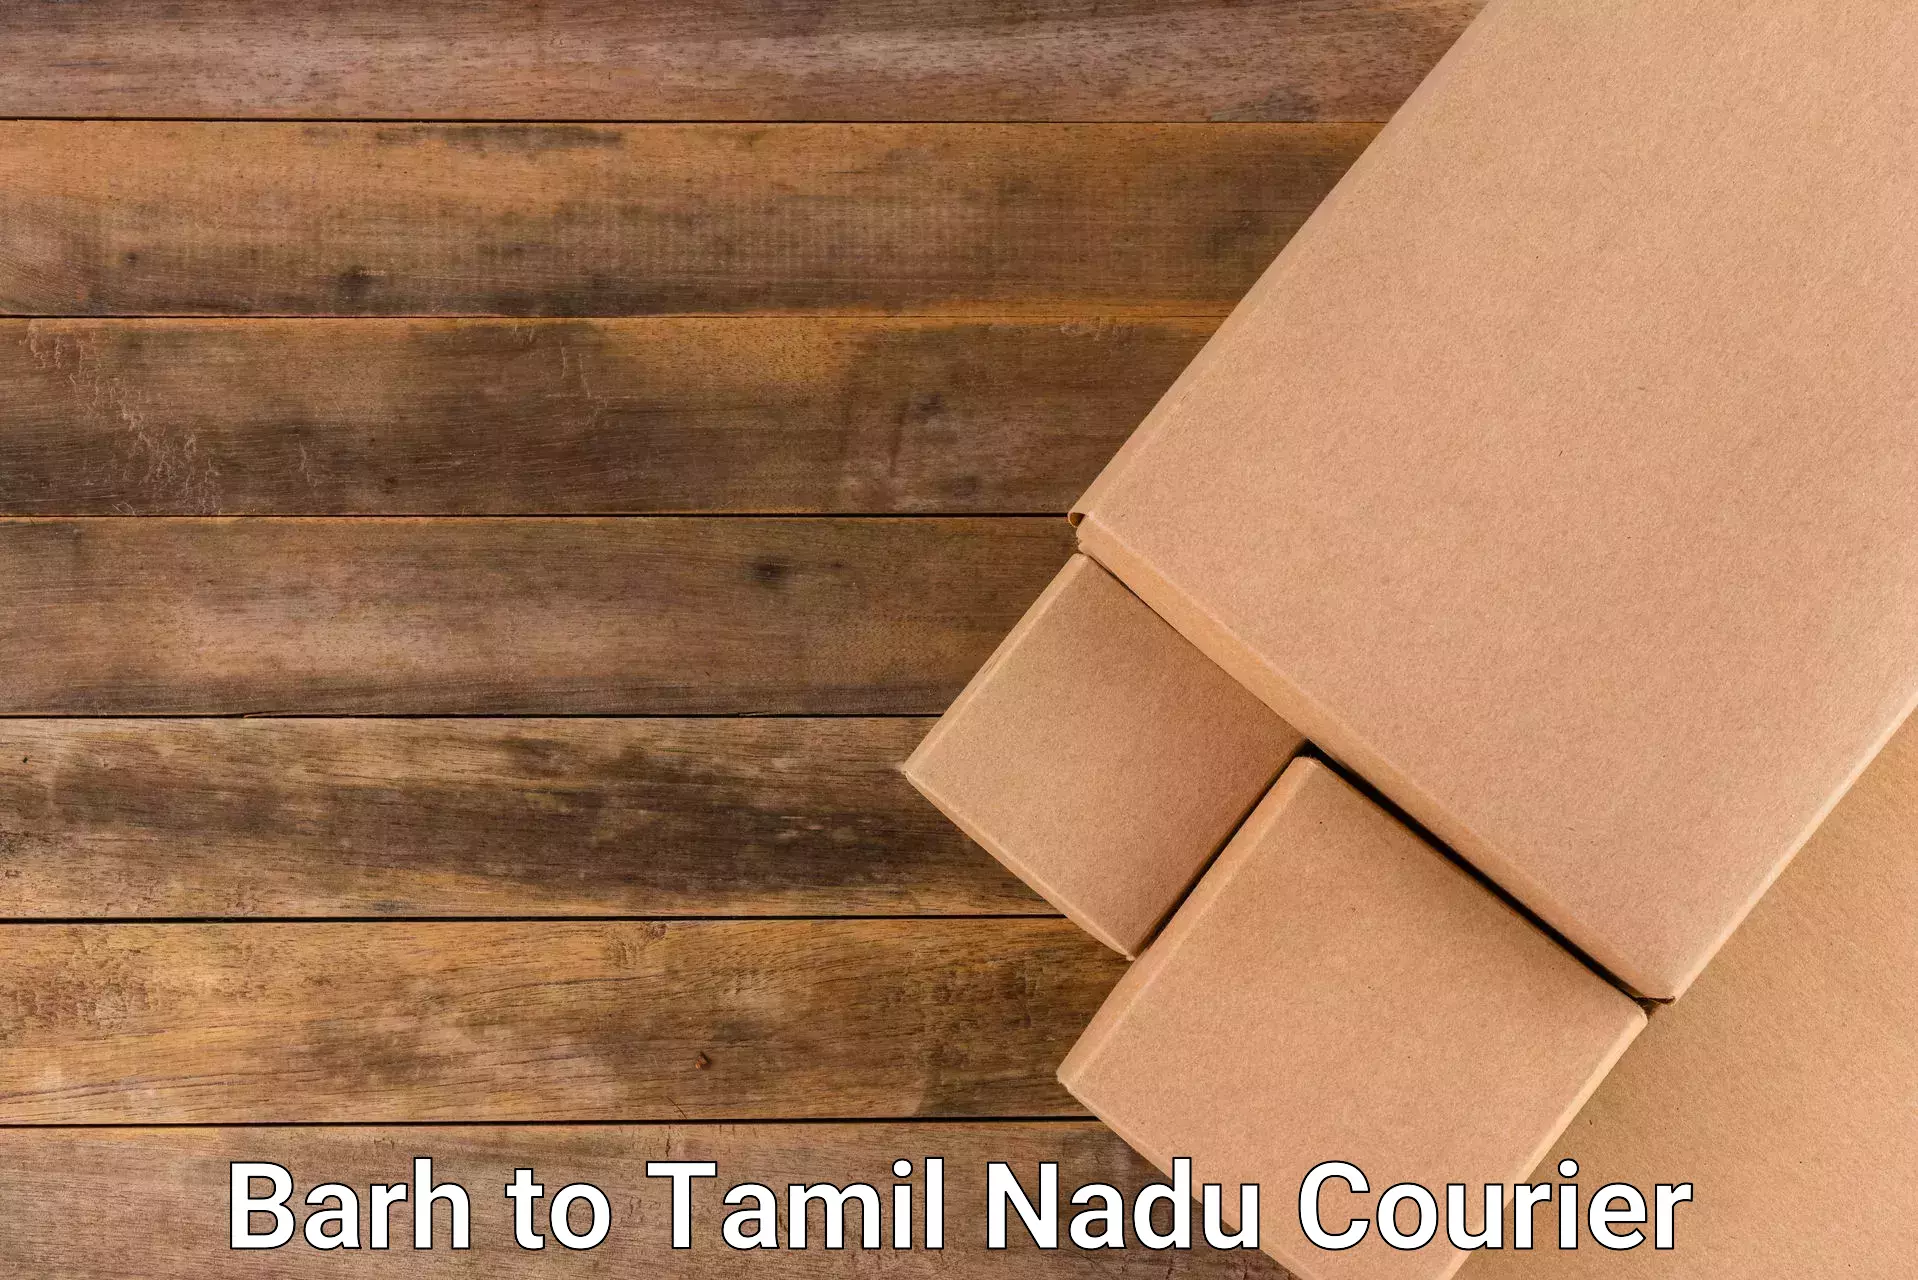 On-call courier service Barh to Ennore Port Chennai